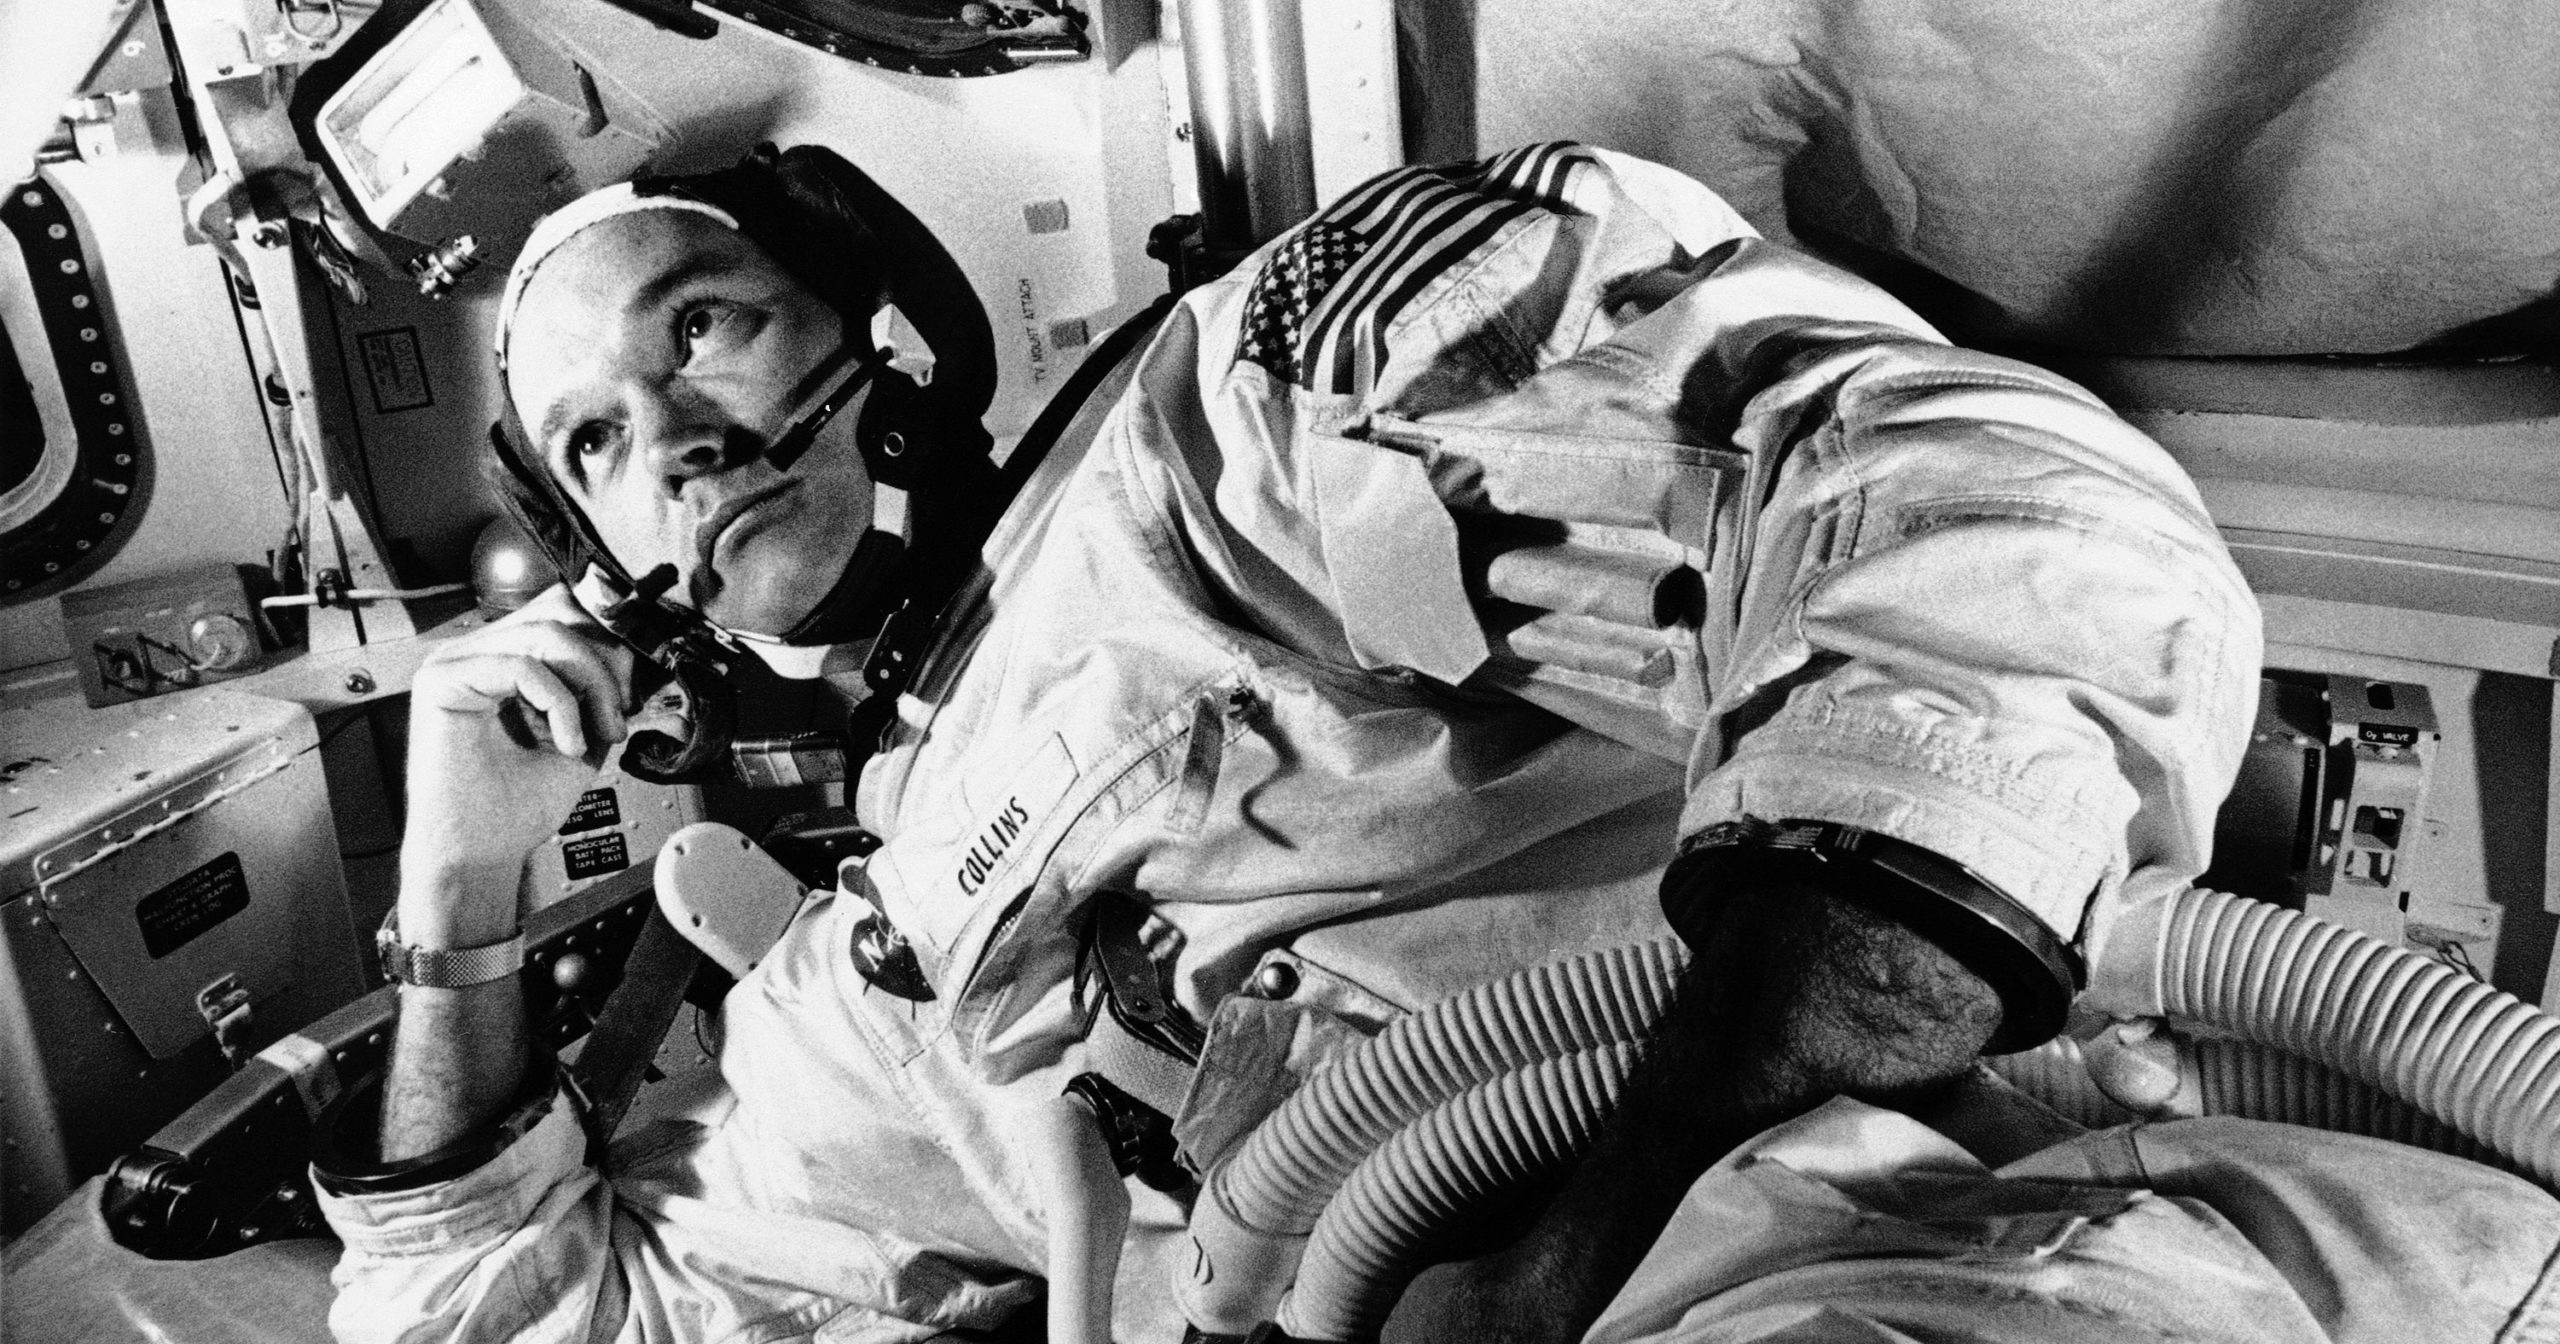 Apollo 11 astronaut Michael Collins takes a break during training for the moon mission in Cape Kennedy, Florida, on June 19, 1969.